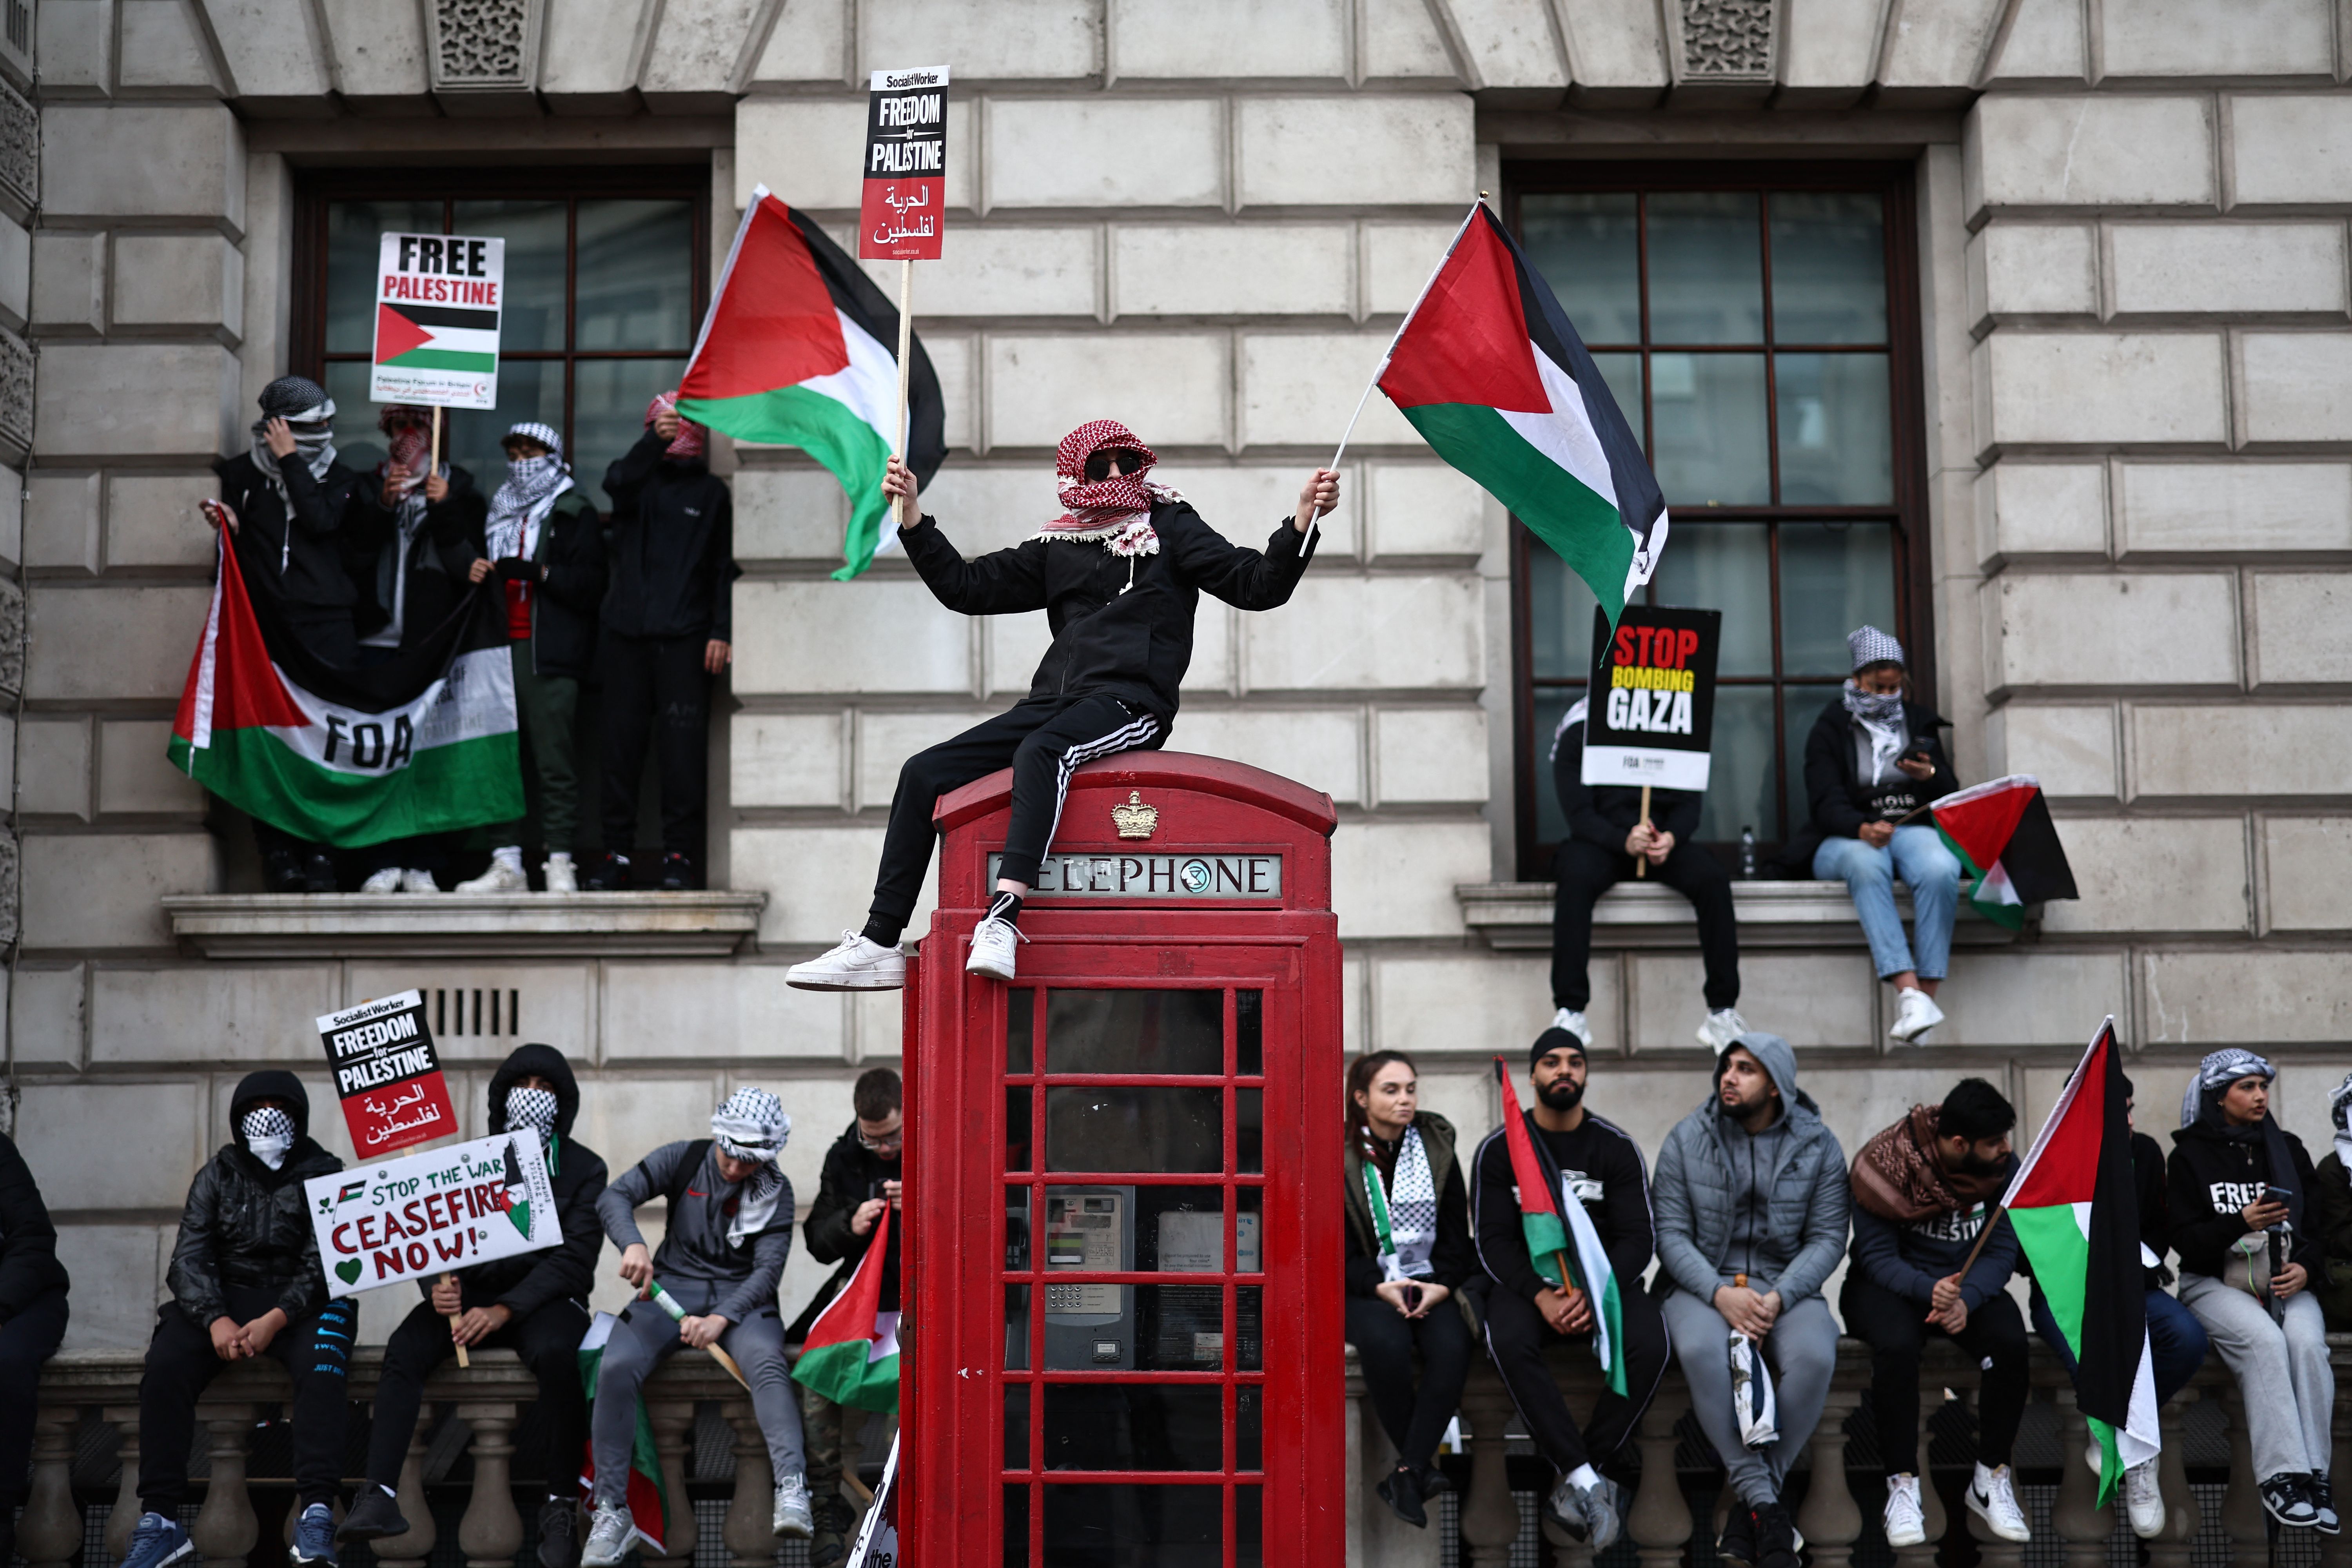 A protestor sits on a red telephone booth holding a Palestinian flag, surrounded by other protesters also holding flags and signs calling for a ceasefire. 